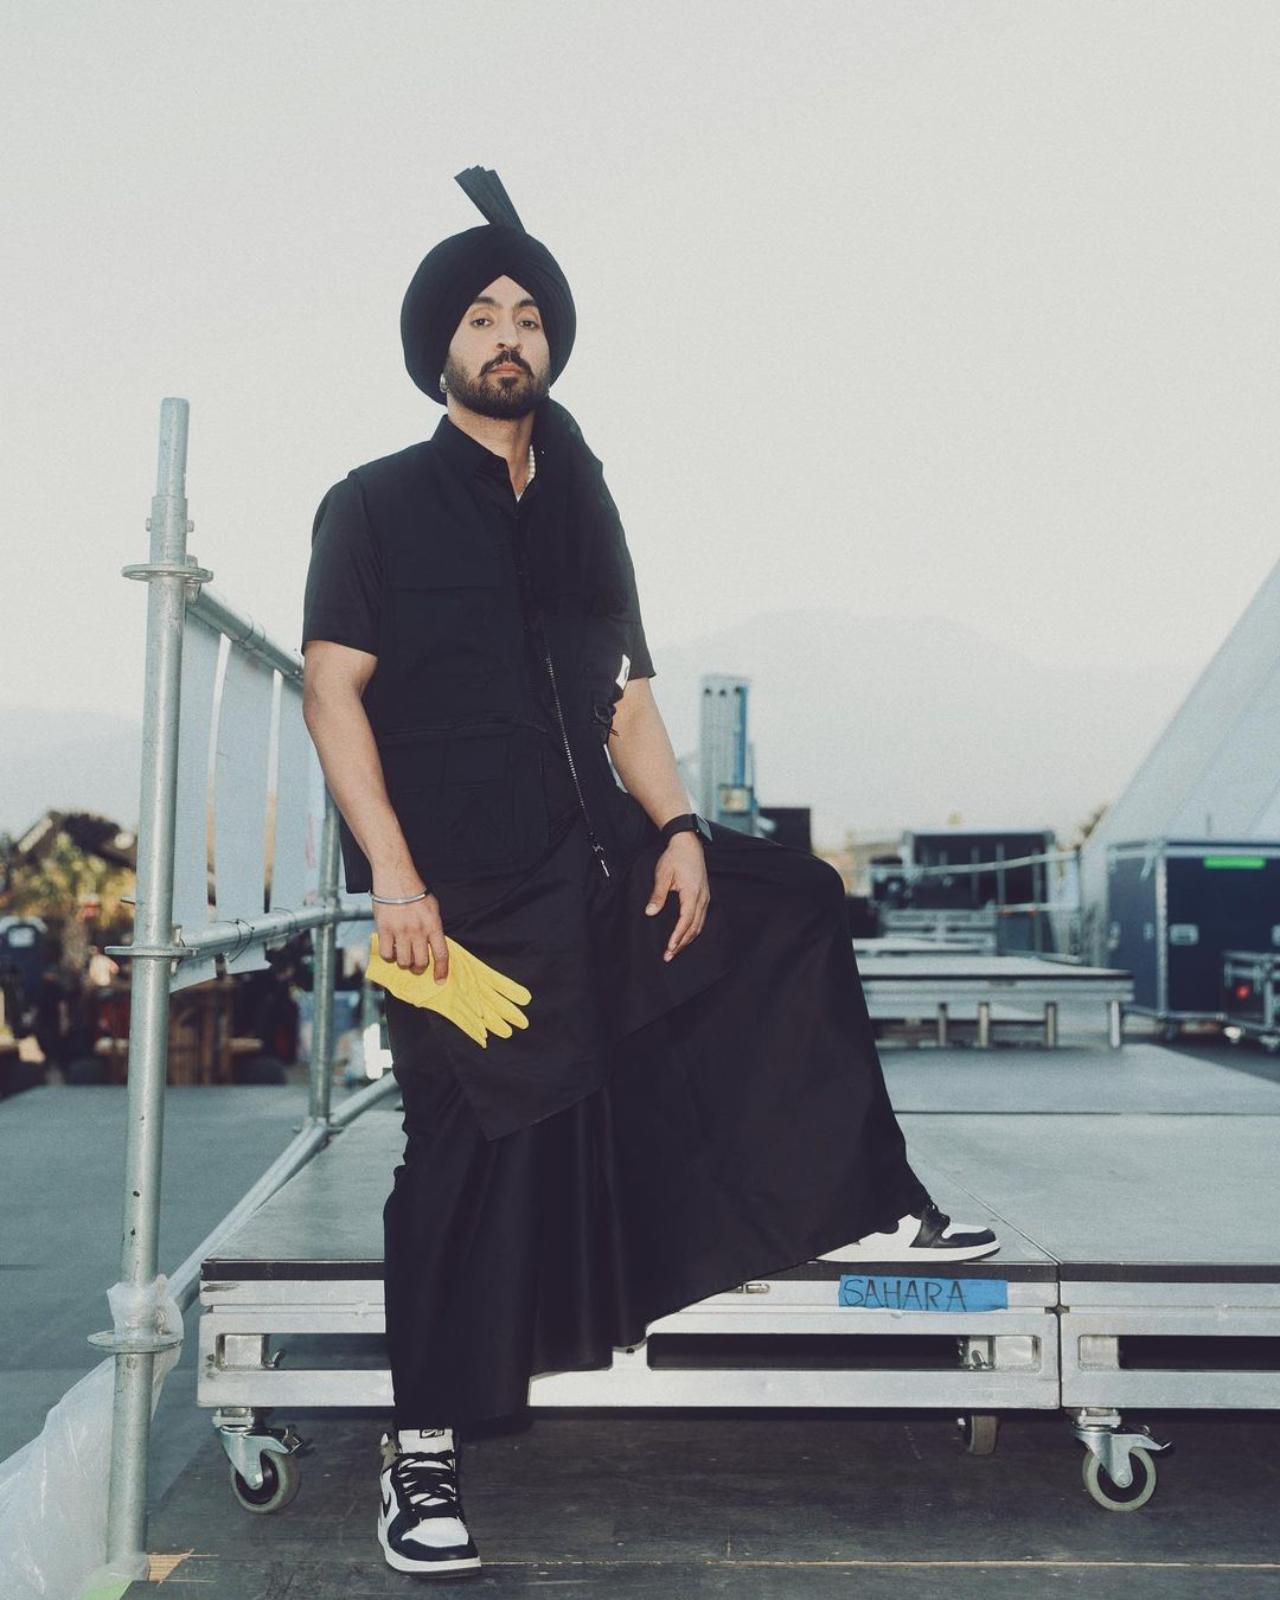 Now it has been written in history. Punjabi aa gaye hum Coachella (Punjabis have reached Coachella). And those who don't understand my songs, catch the vibe,